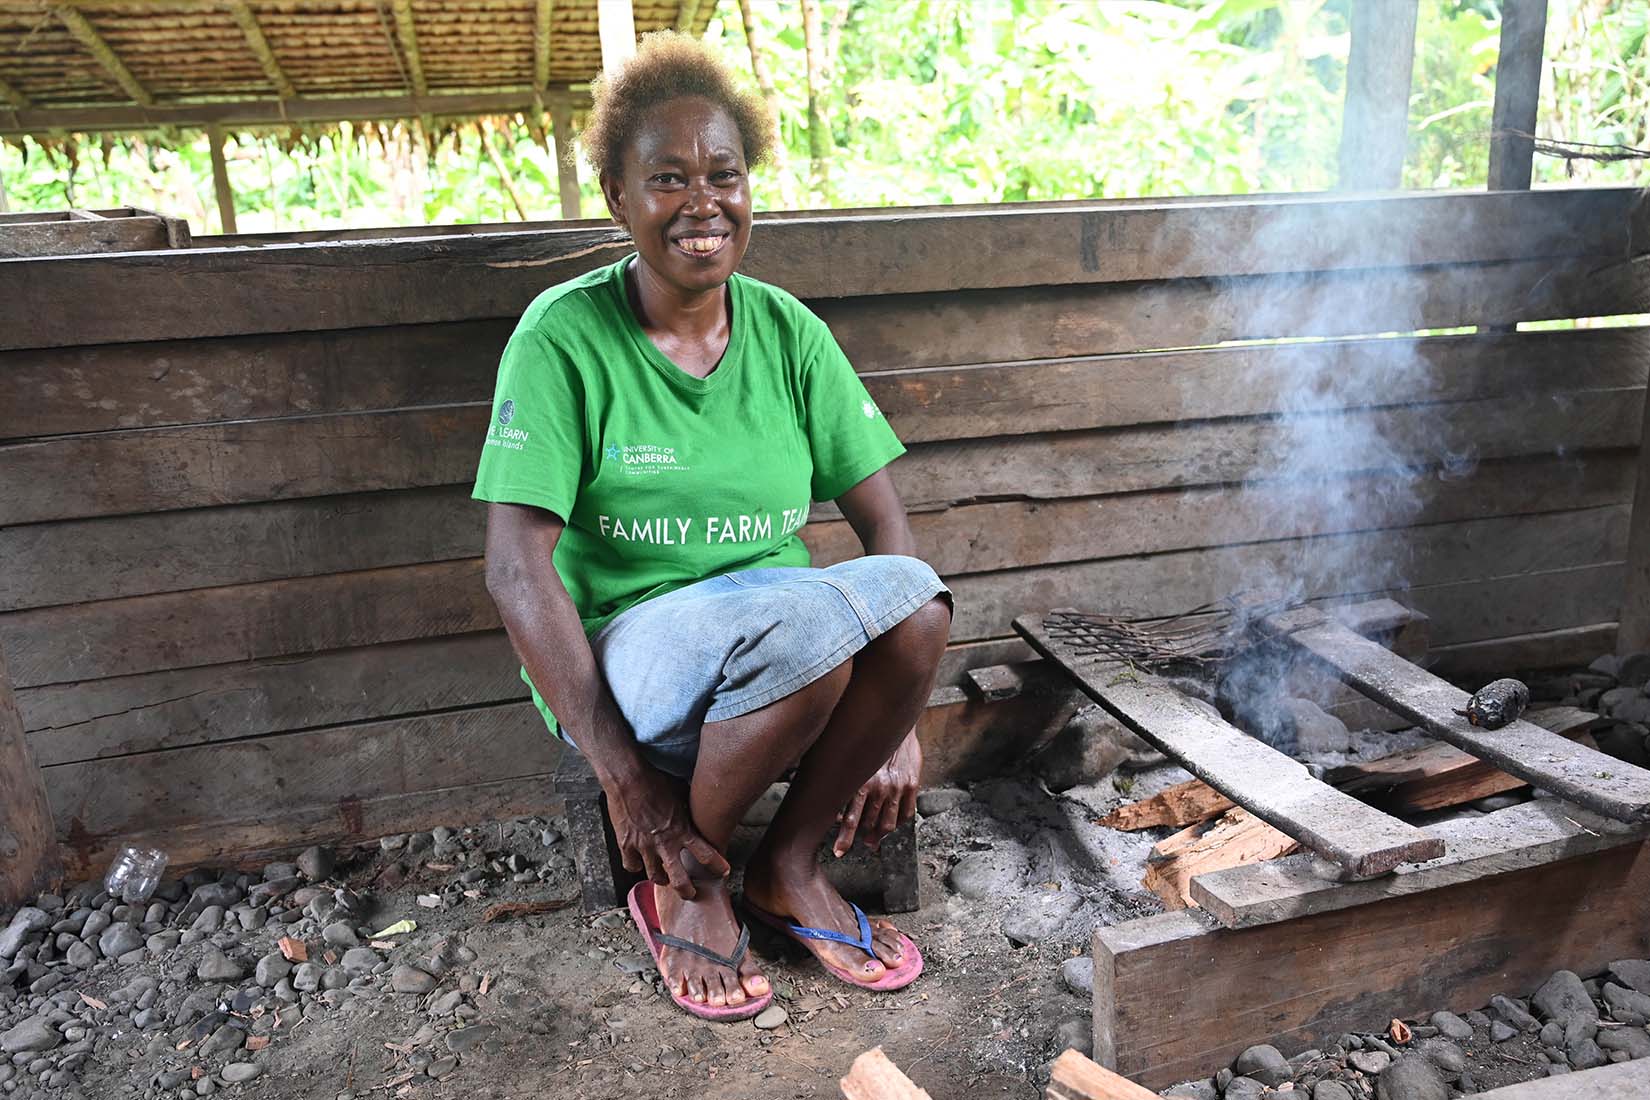 A woman sitting by a fire, smiling at the camera.